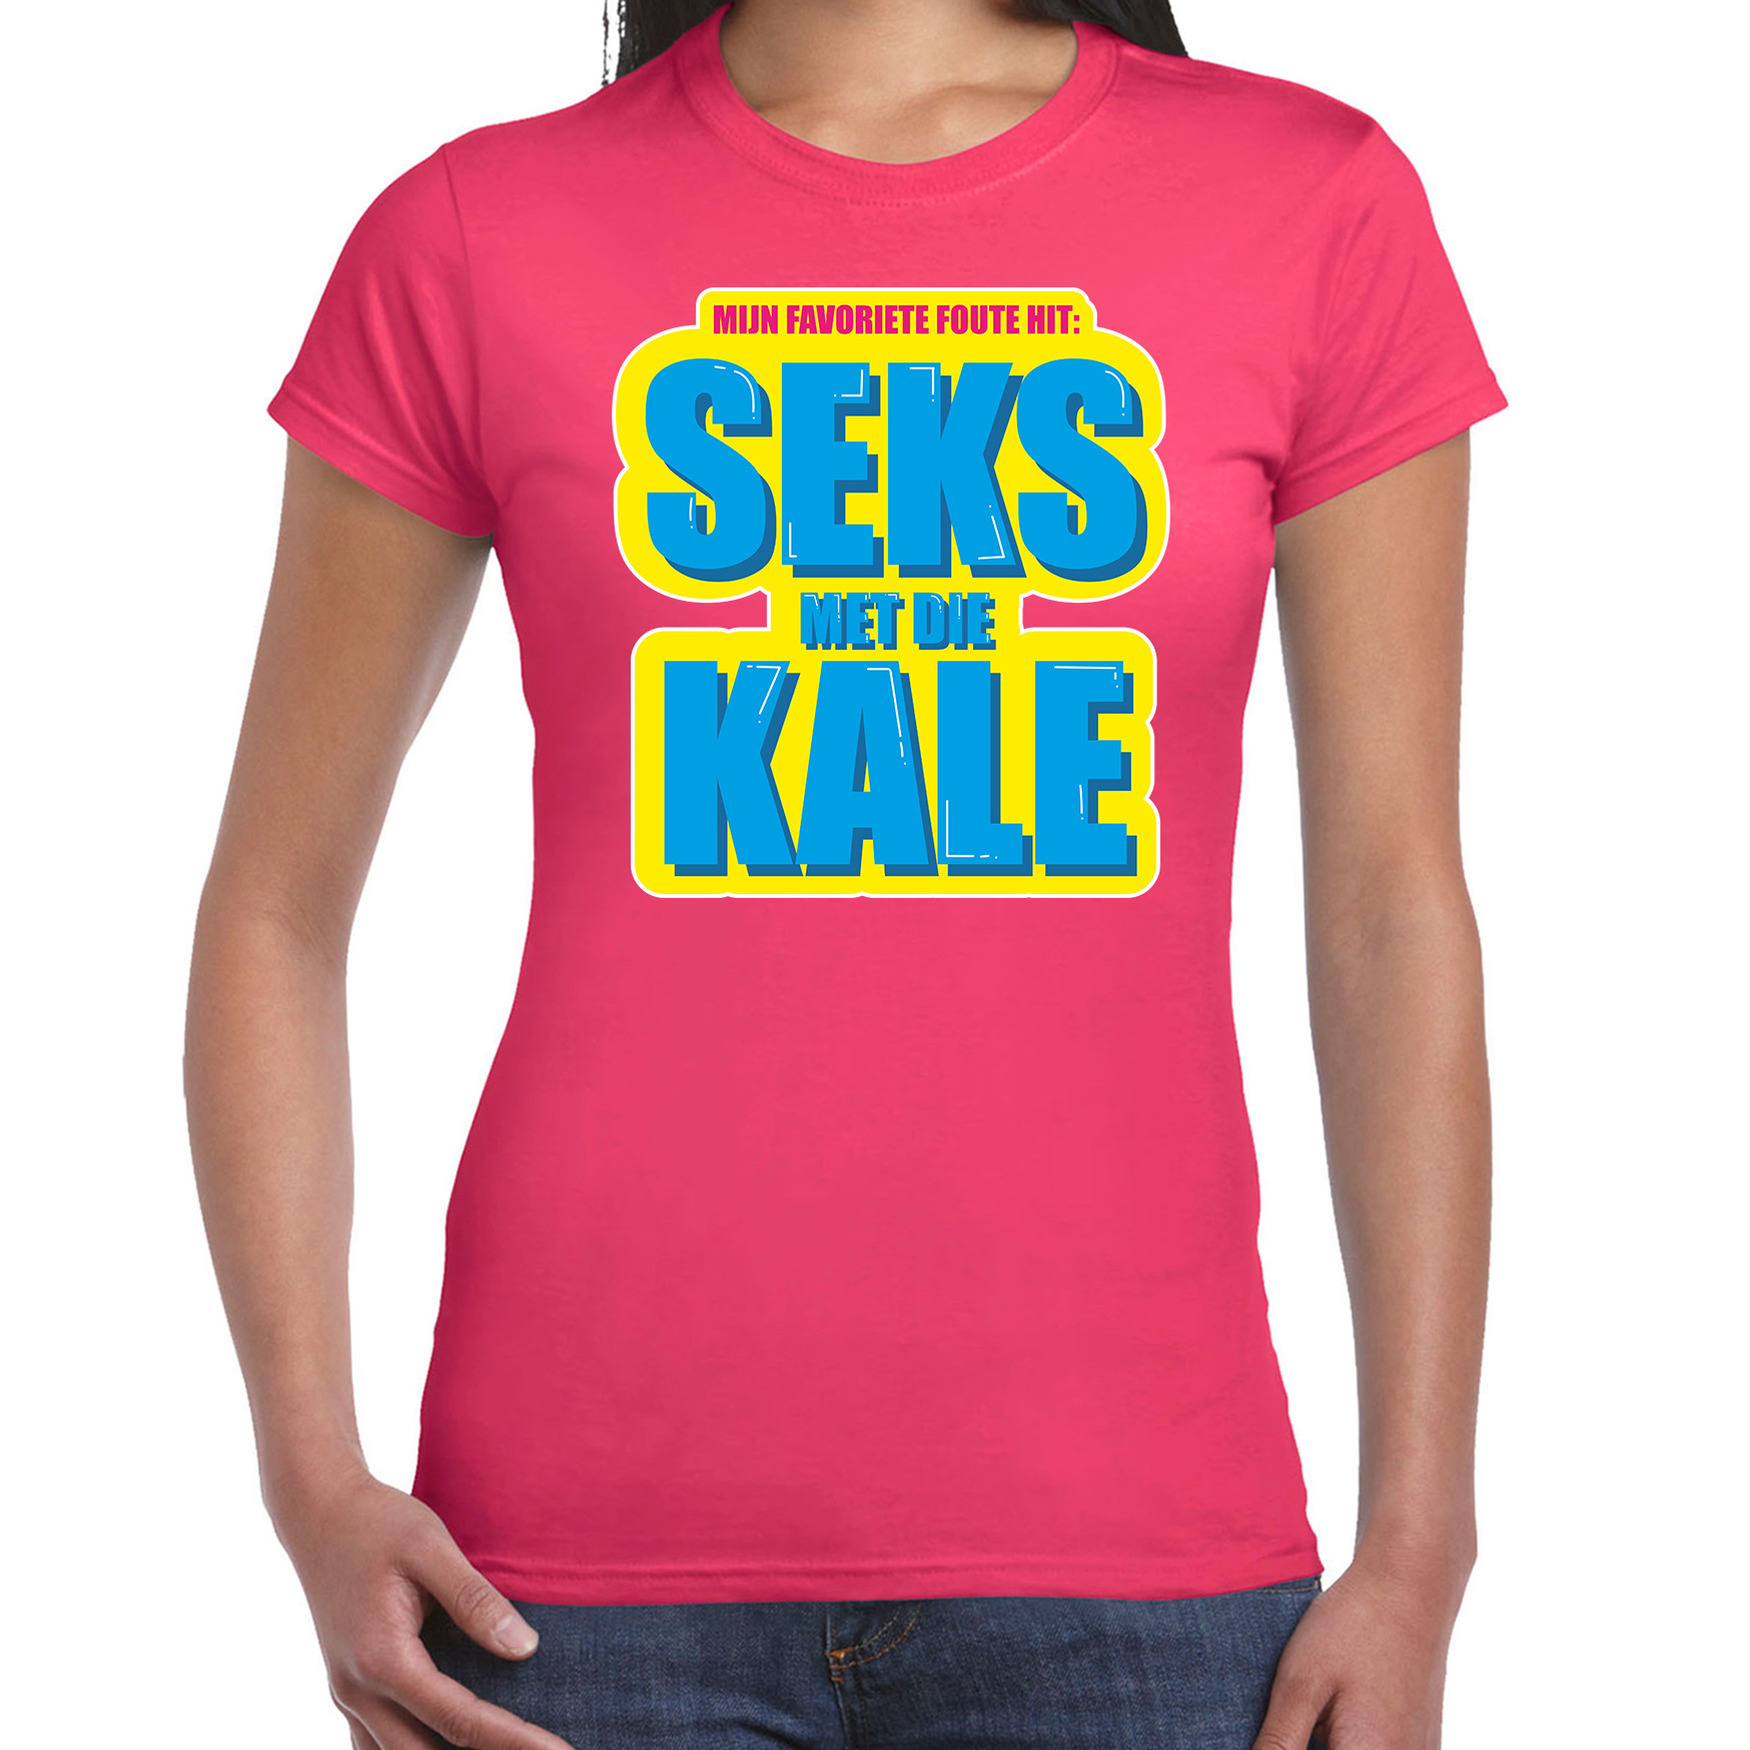 Foute party Seks met die Kale verkleed t-shirt roze dames Foute party hits outfit- kleding